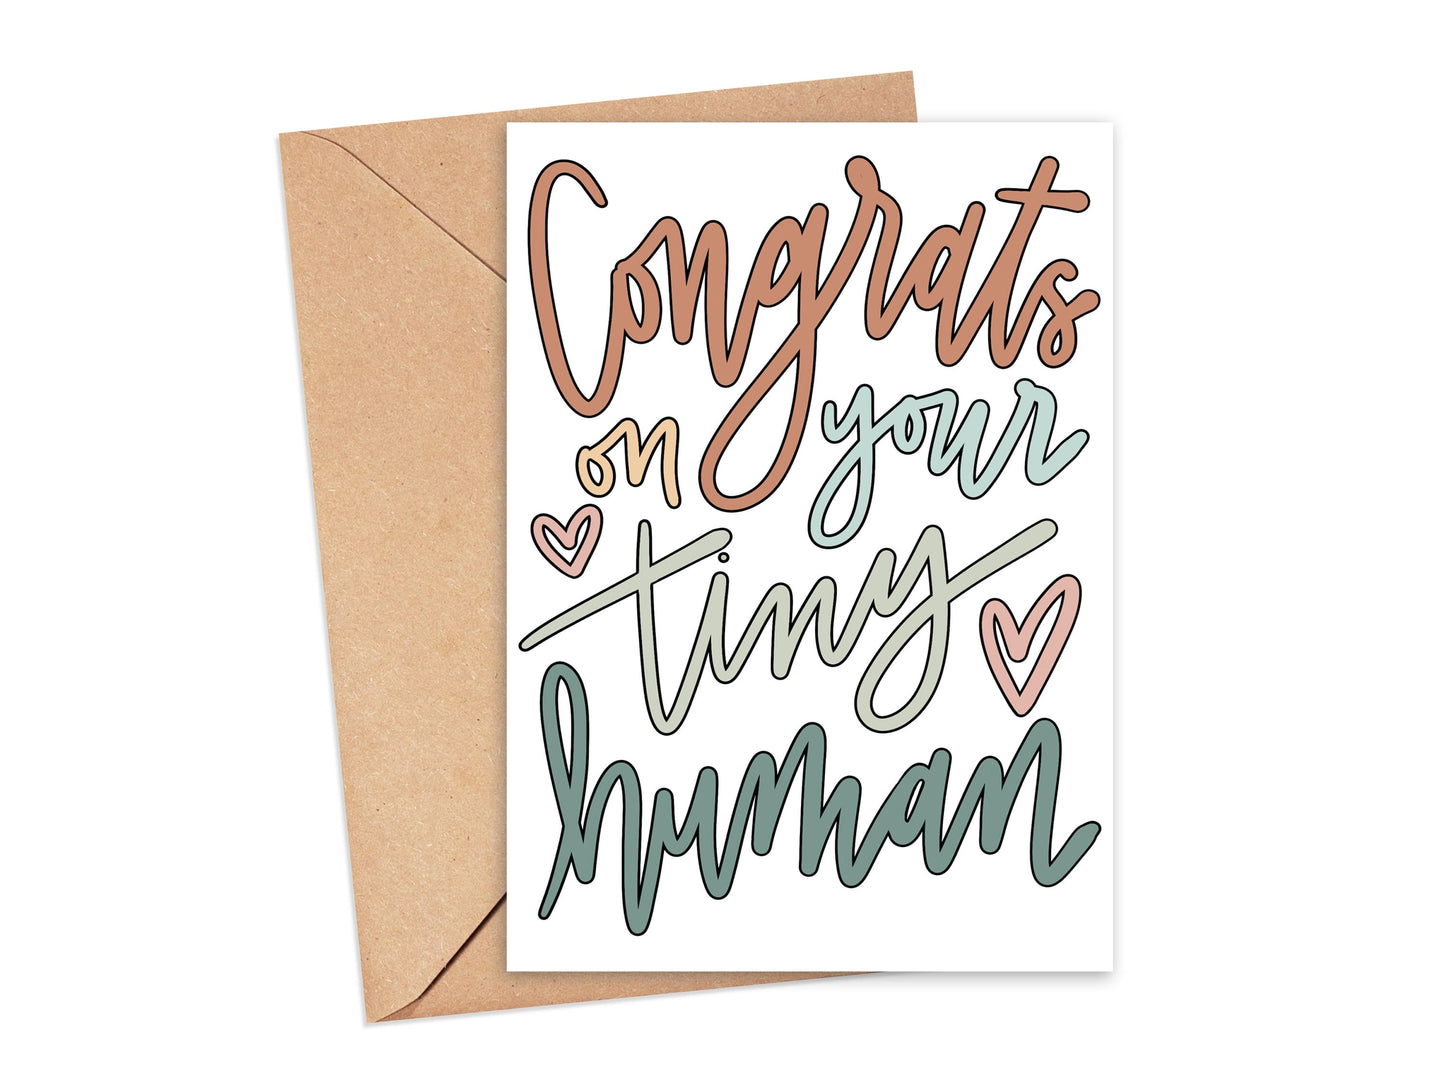 Congrats On Your Tiny Human Card Simply Happy Cards